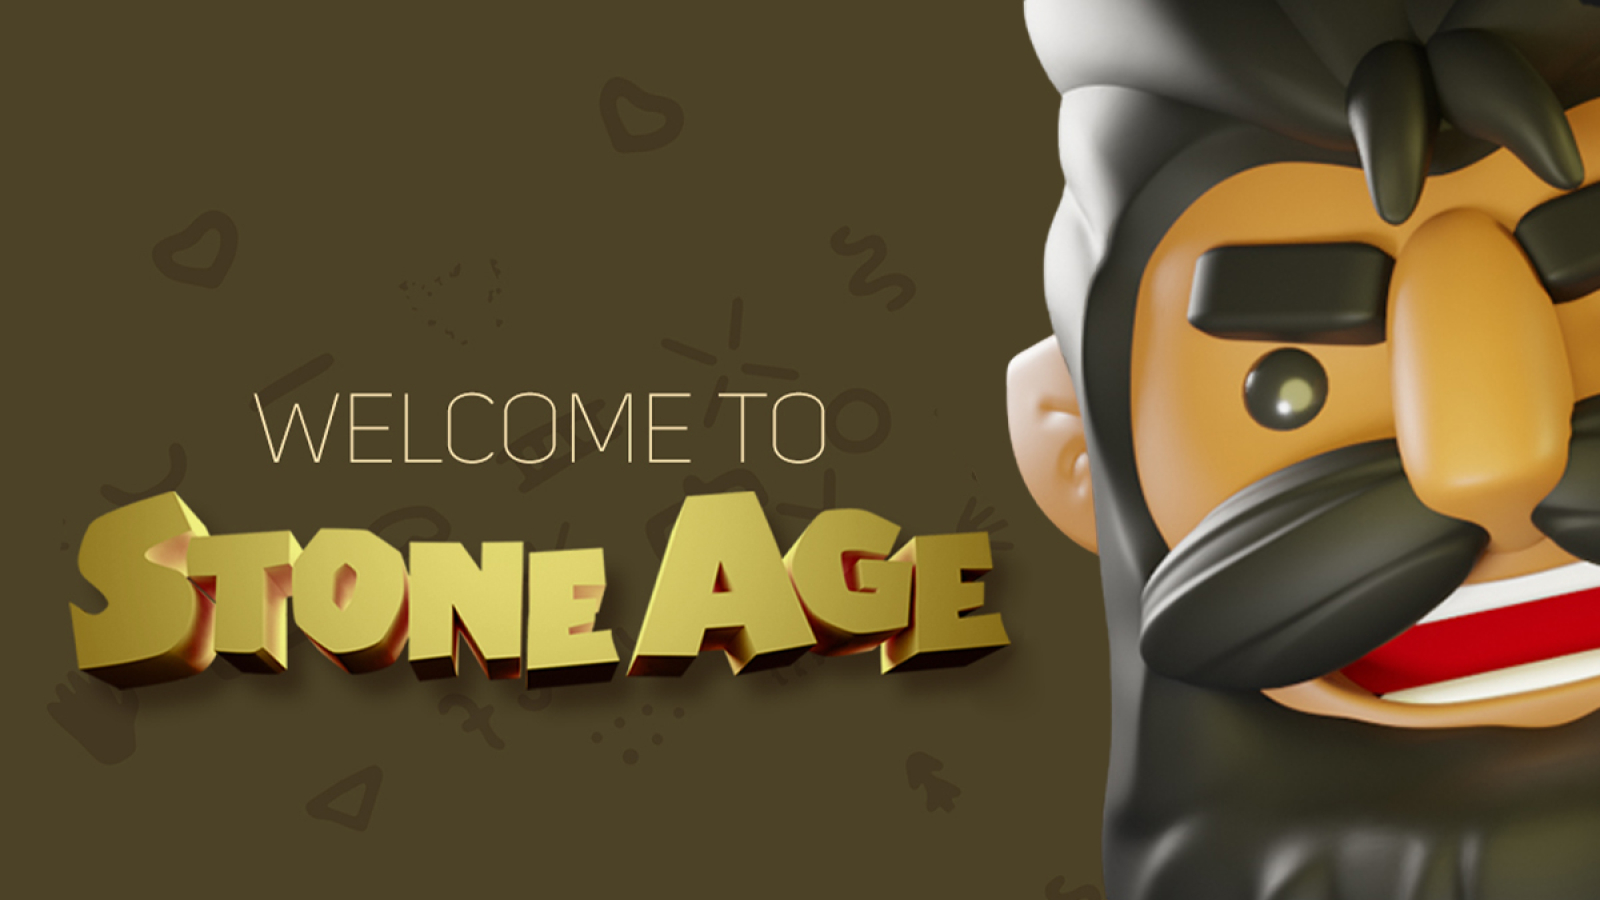 StoneAge - The One of a Kind NFT Marketplace